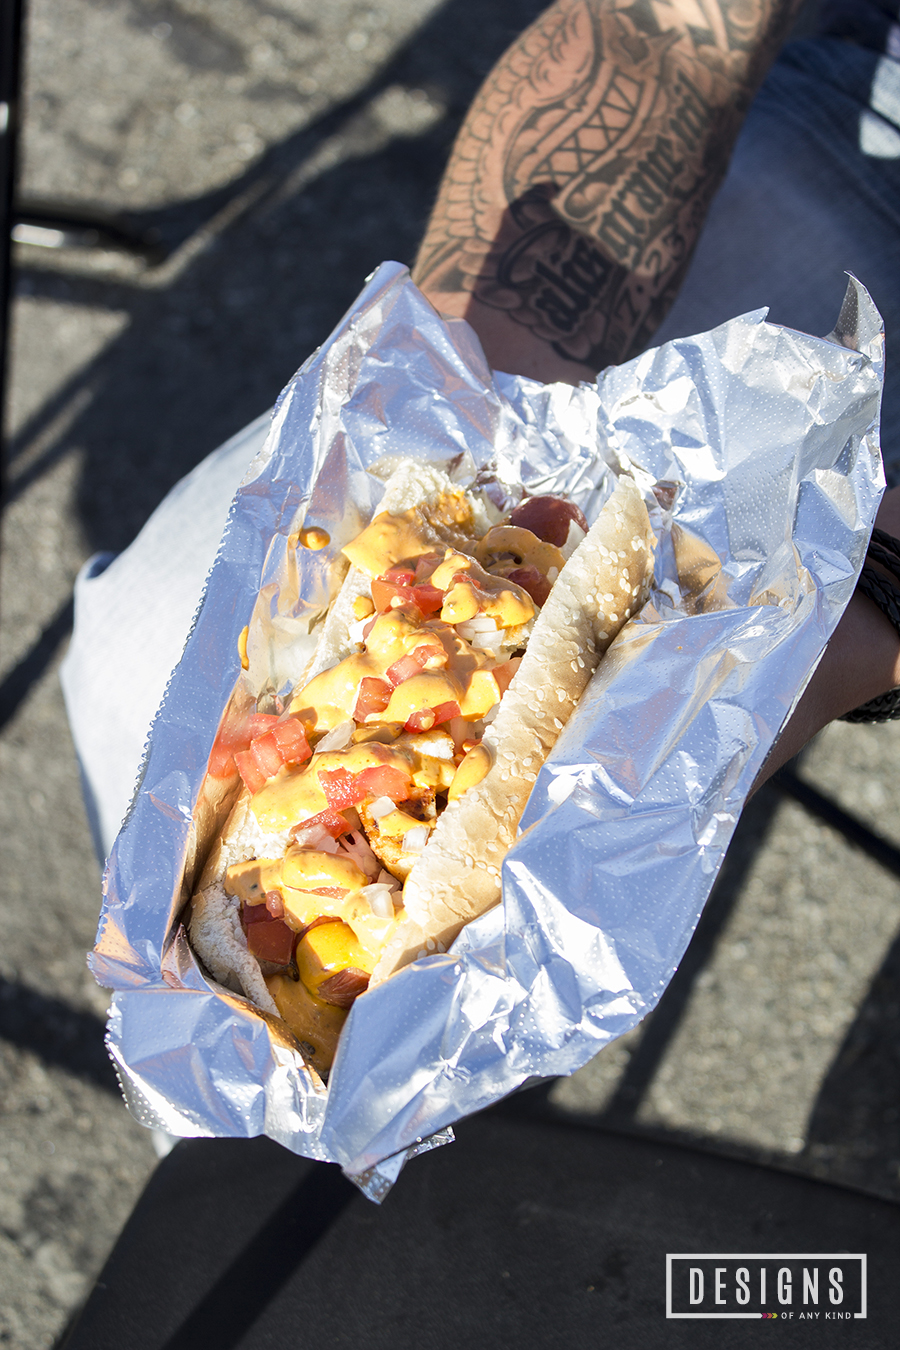 Around Town: Off The Grid - Sunnyvale, CA. Off the Grid is a roaming mobile food extravaganza. They offer fantastic food, music and a great time across the Bay Area. | Designs of Any Kind